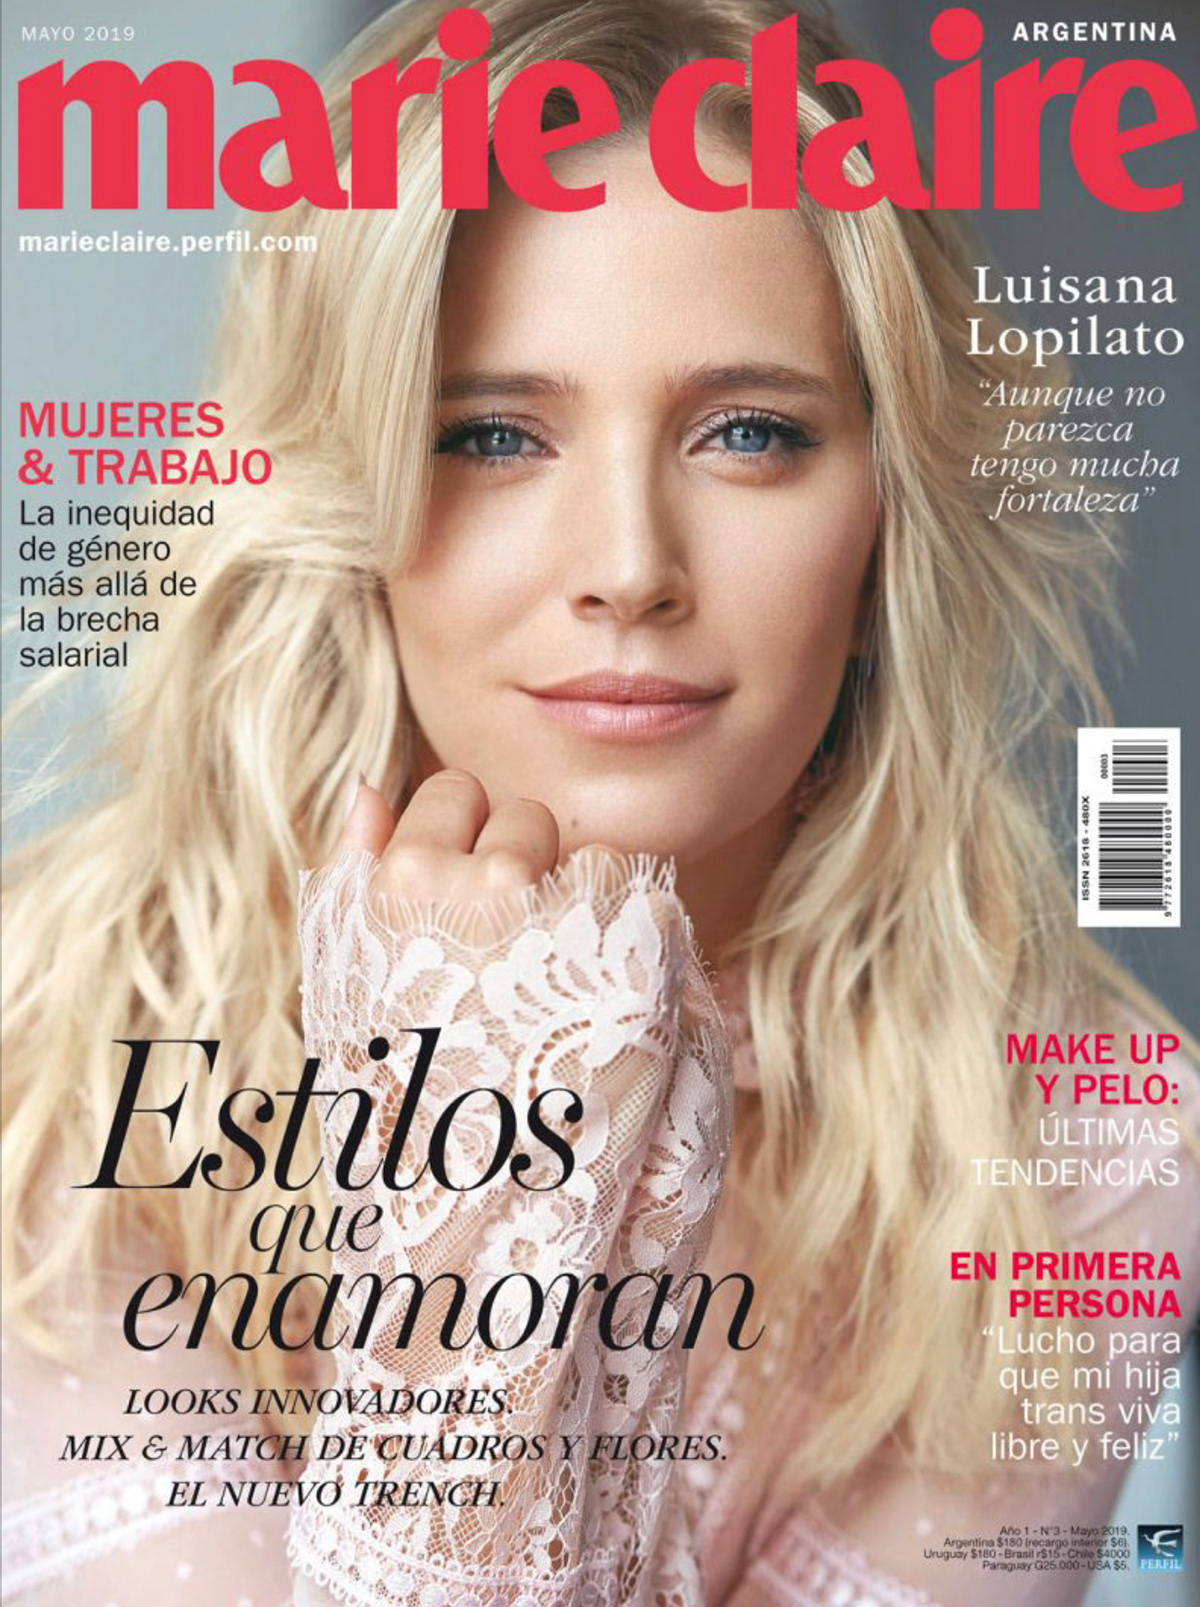 Luisana Lopilato marie claire argentina Digital Retouch high end retouch brule studio dodge and burn editorial